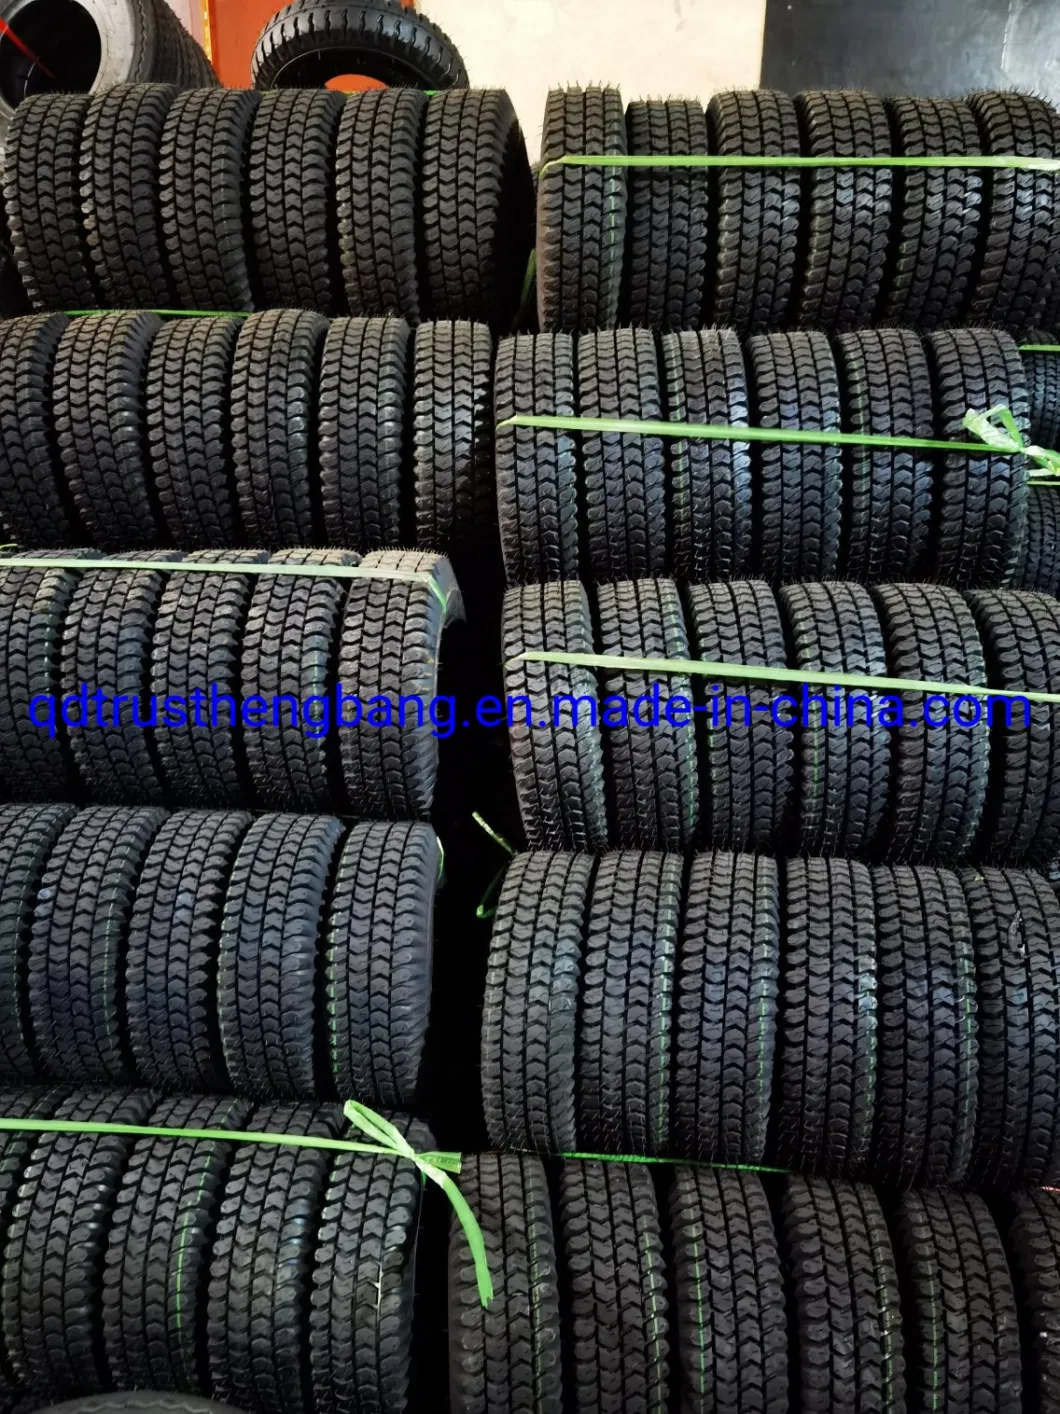 High Quanity Wheelbarrow Tires and Tubes 4.10/3.50-4 for Pneumatic Wheel with 4.10/3.50-4 Steel Rim, Tire and Tube